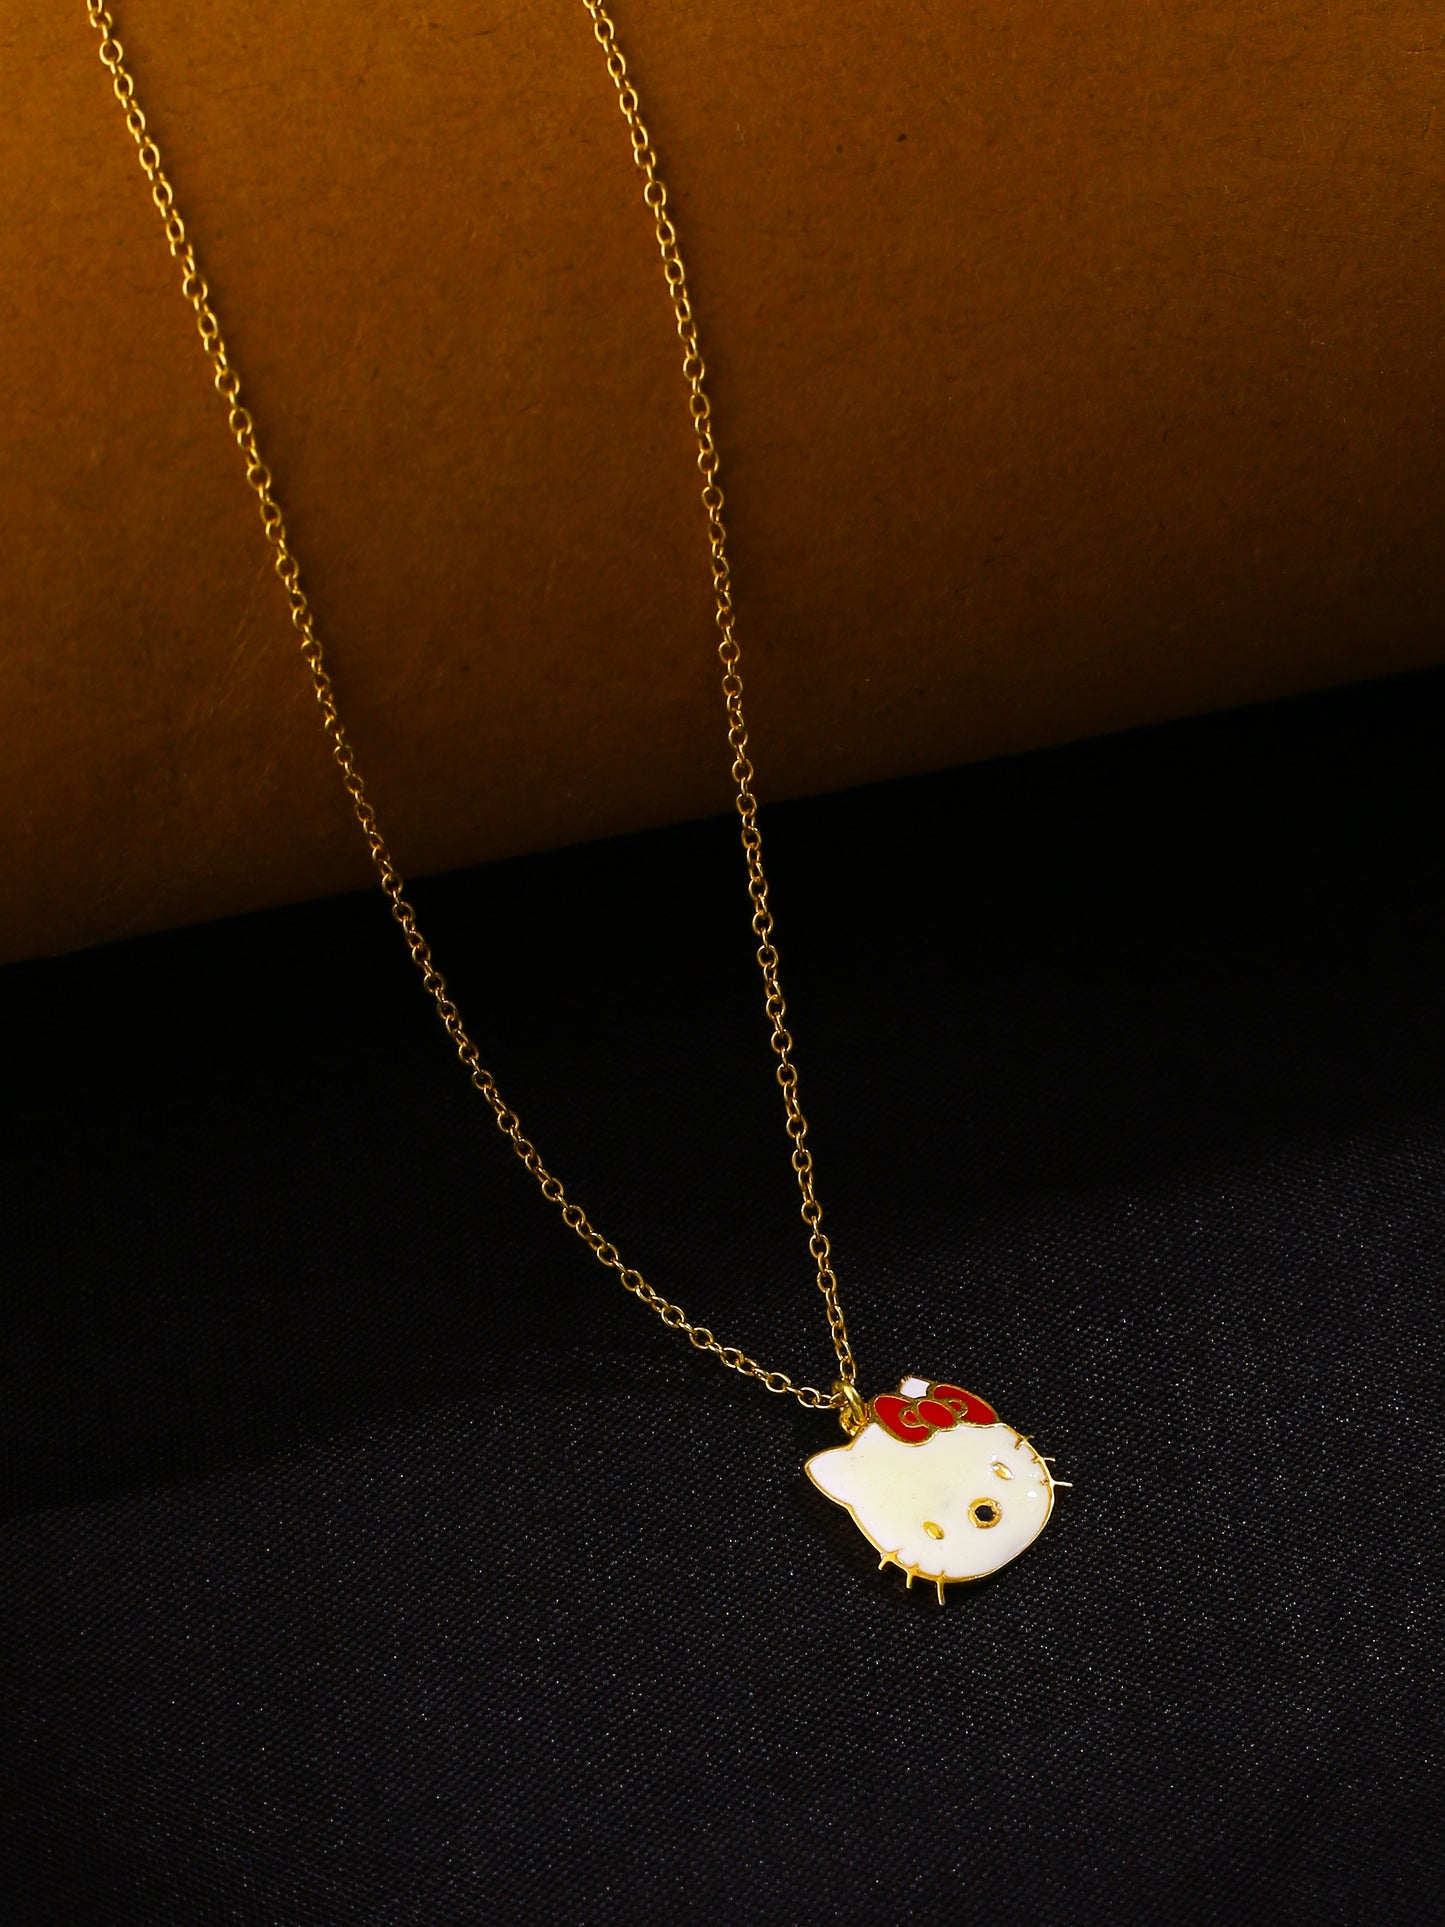 The Kitty Couture Necklace: A Stylish Enamel Pendant and Chain